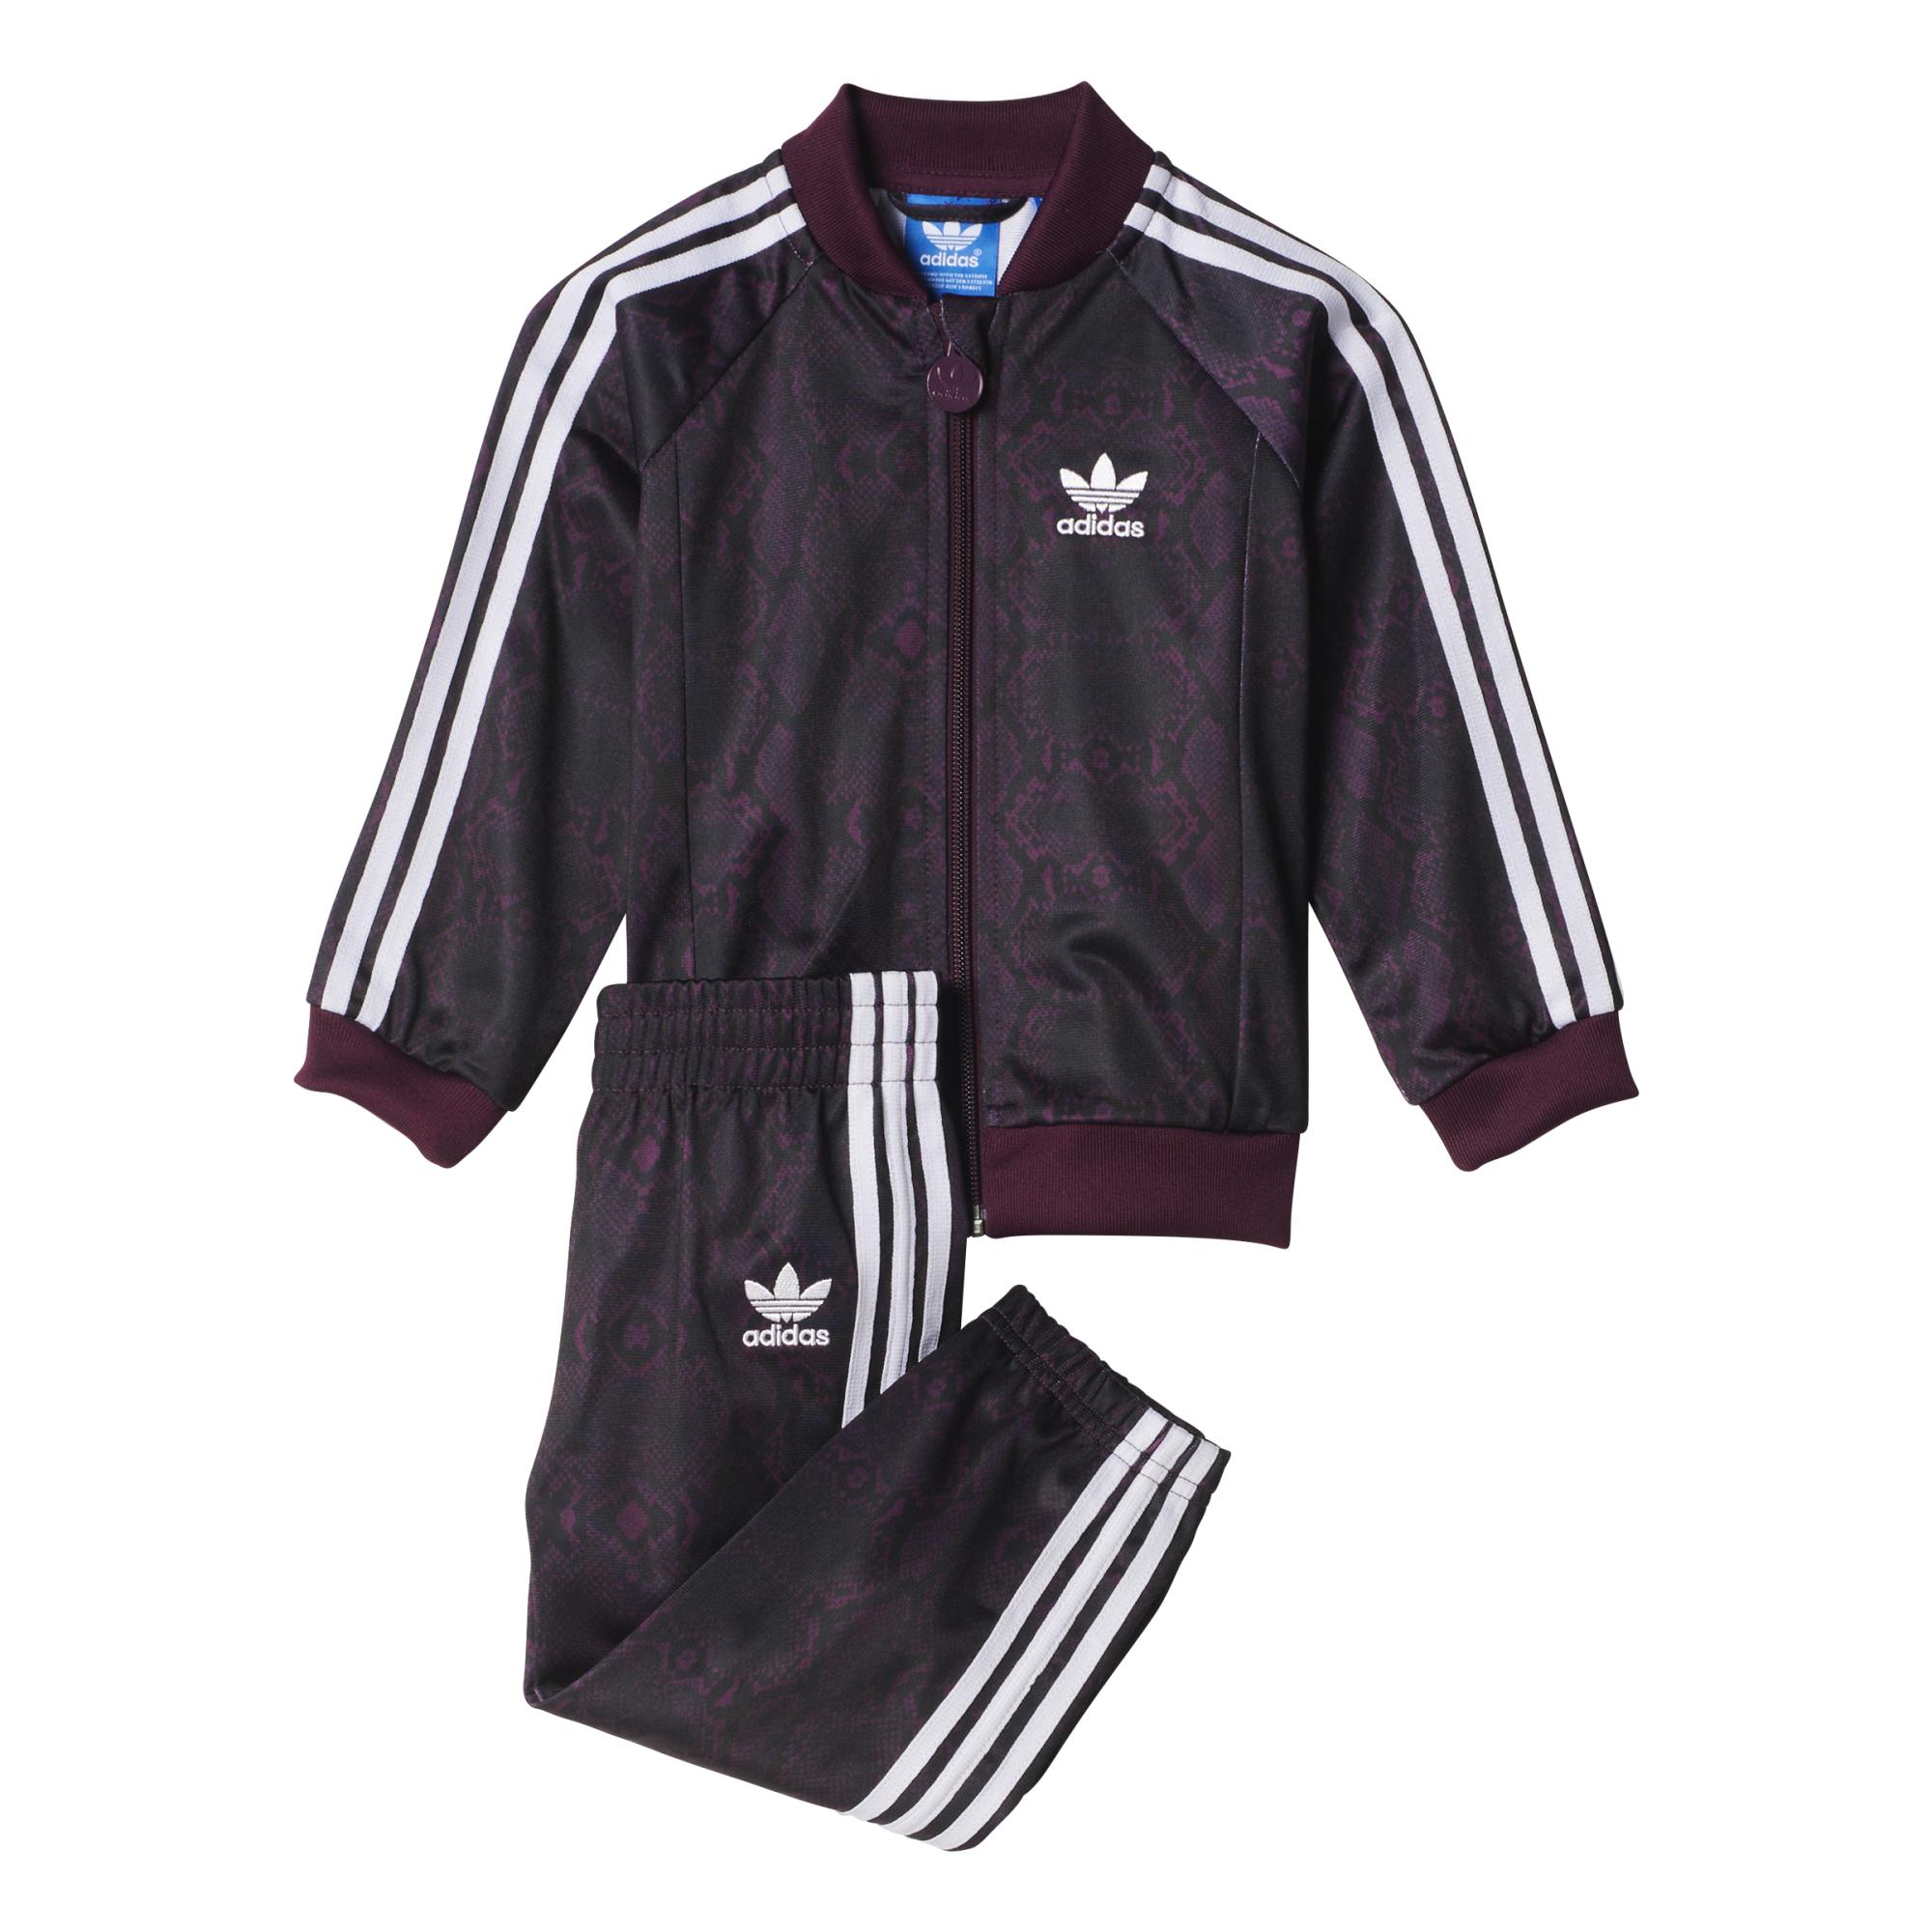 chandal adidas antiguo where can i buy fedfc 6fc9f